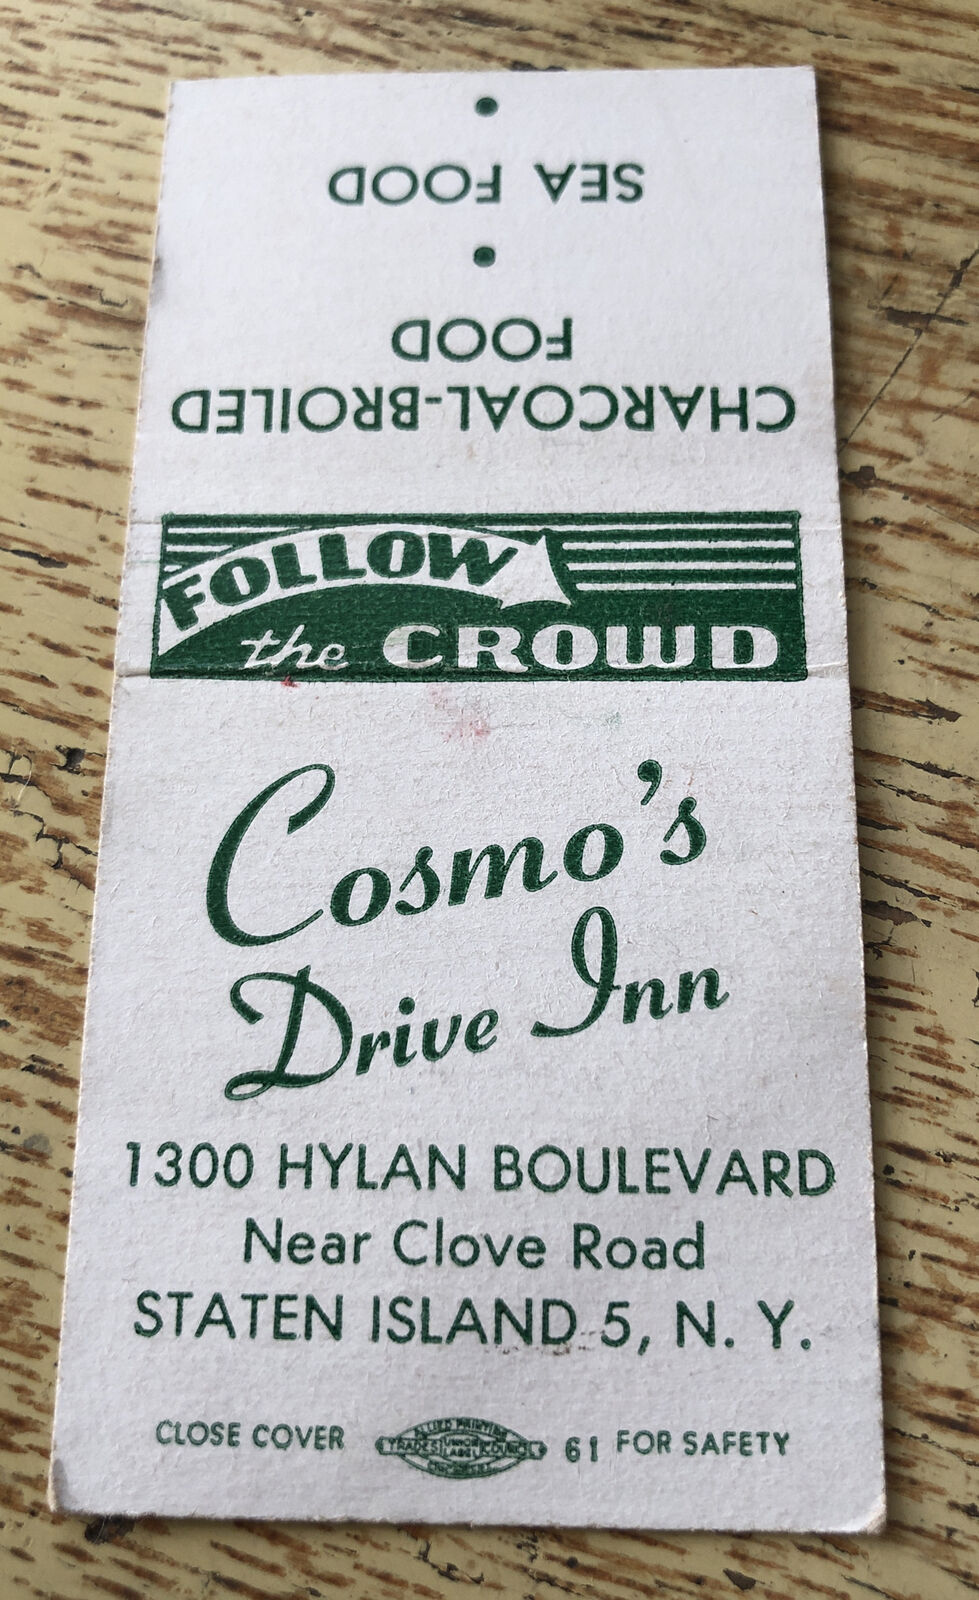 1950s-60s Cosmo’s Drive Inn Staten Island New York Matchcover Follow The Crowd